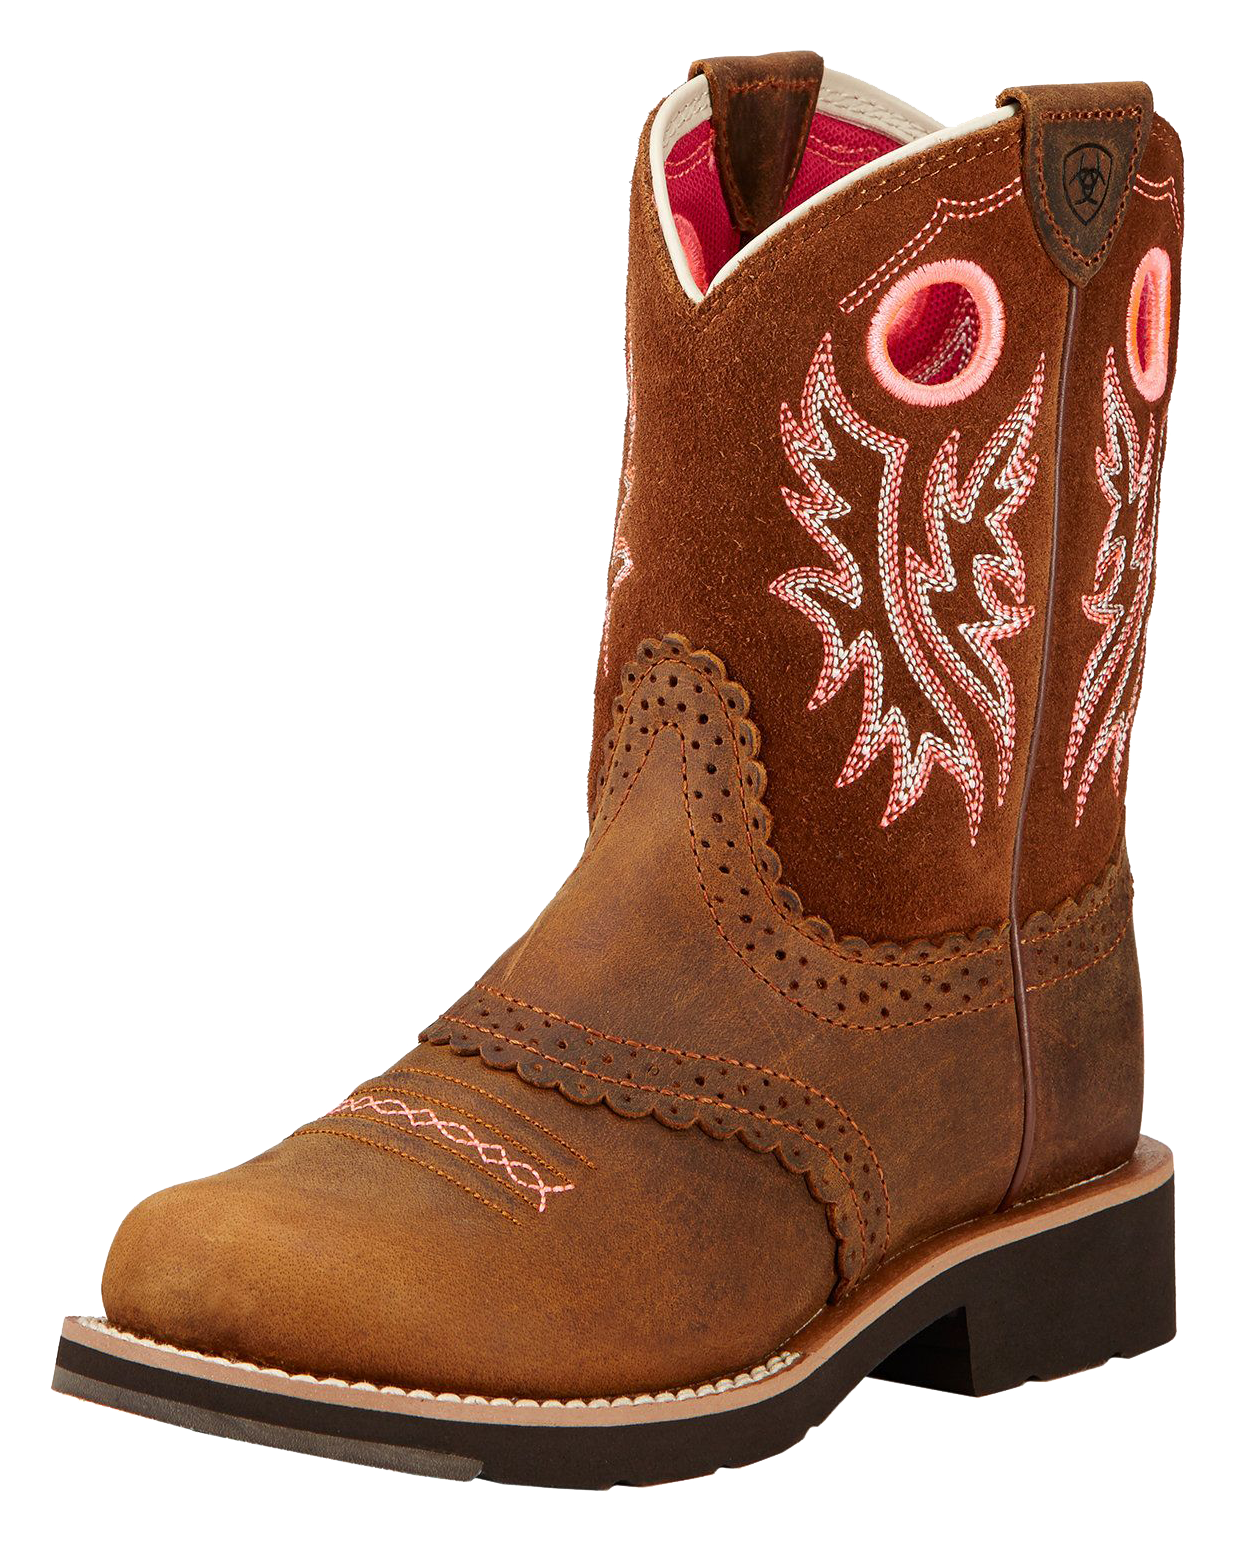 Ariat Fatbaby Cowgirl Western Boots for Toddlers - Powder Brown - 9.5 Toddler